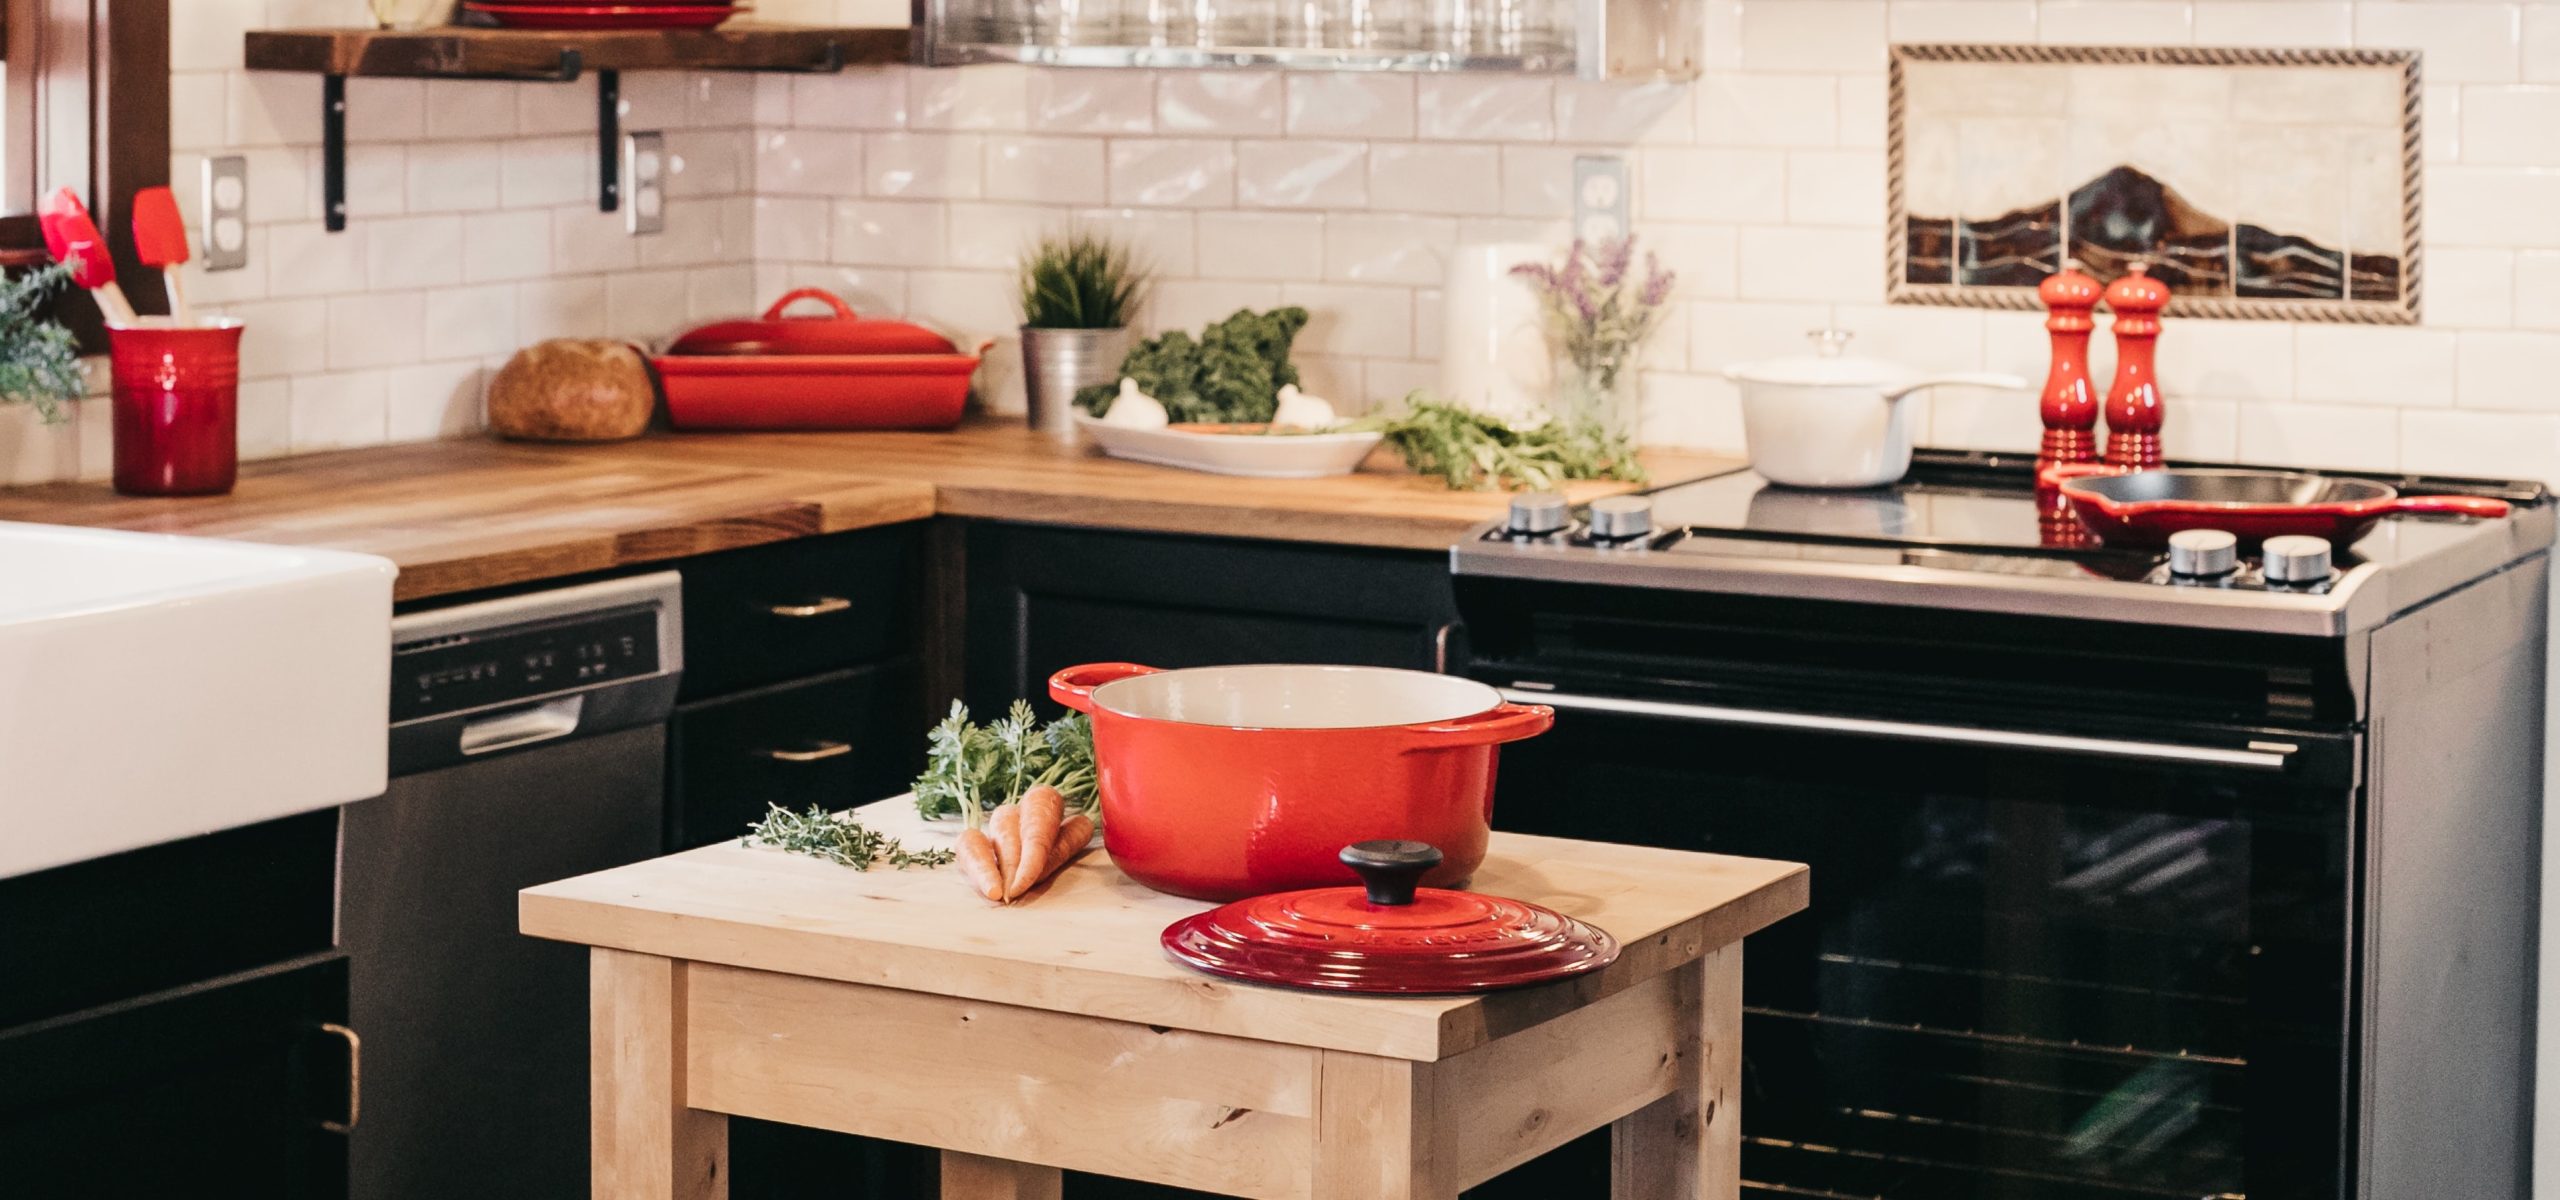 Modern kitchen with wooden island and red ceramic dutch oven